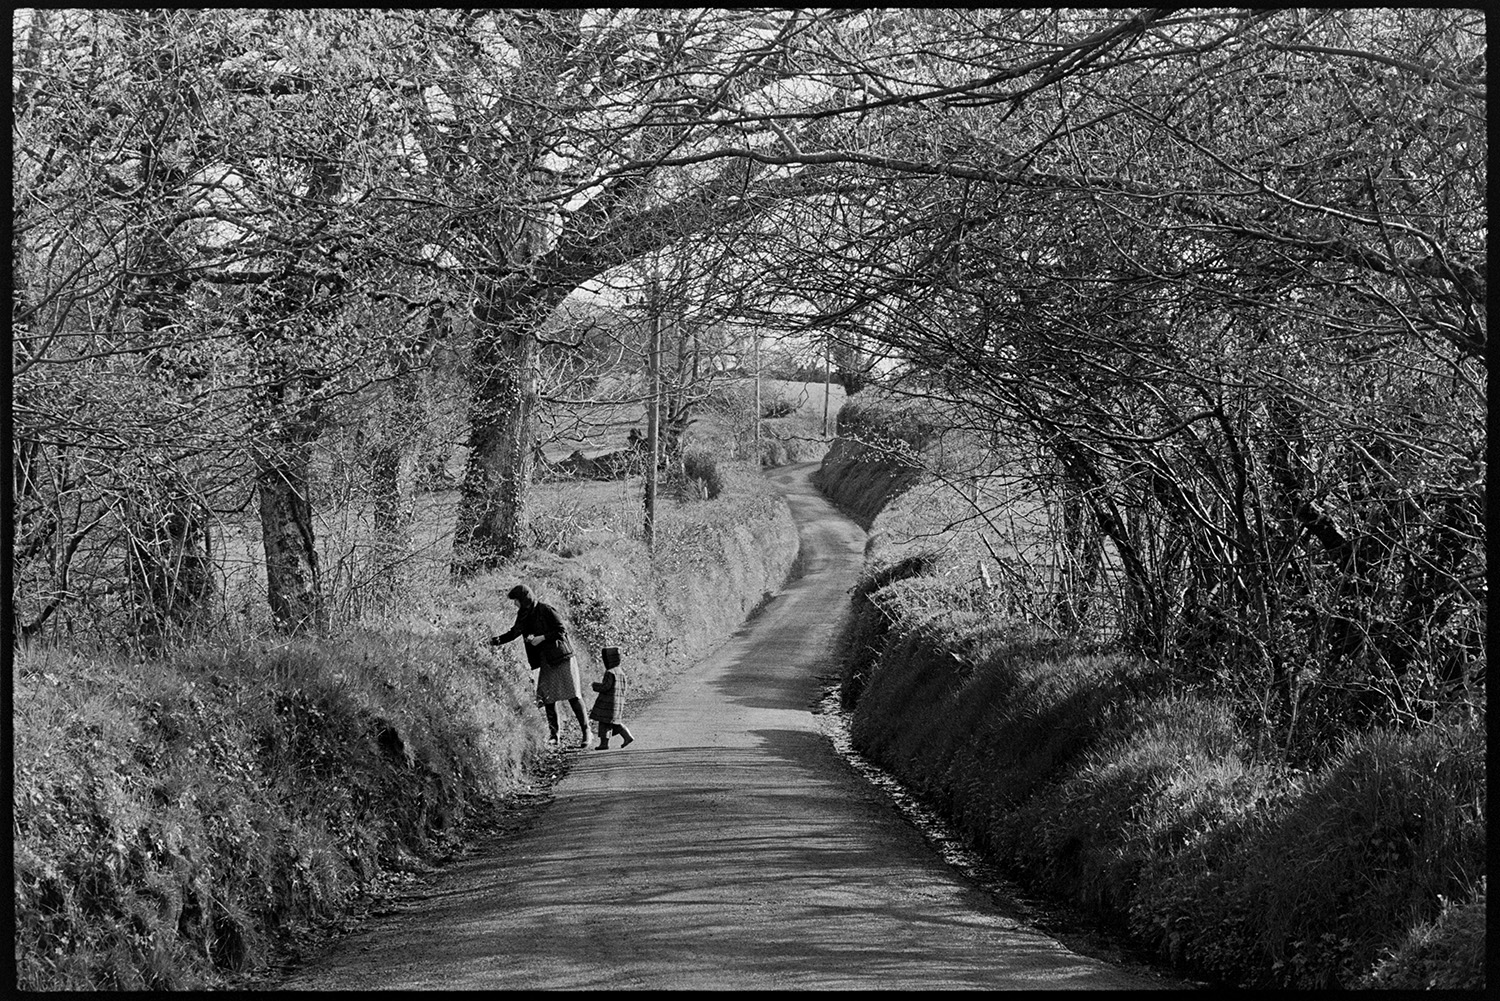 Woman and child picking flowers in country lane, trees overhead. 
[Robin Ravilious and Ella Ravilious picking flowers from a hedgebank with trees along a lane at Addisford, Dolton.]